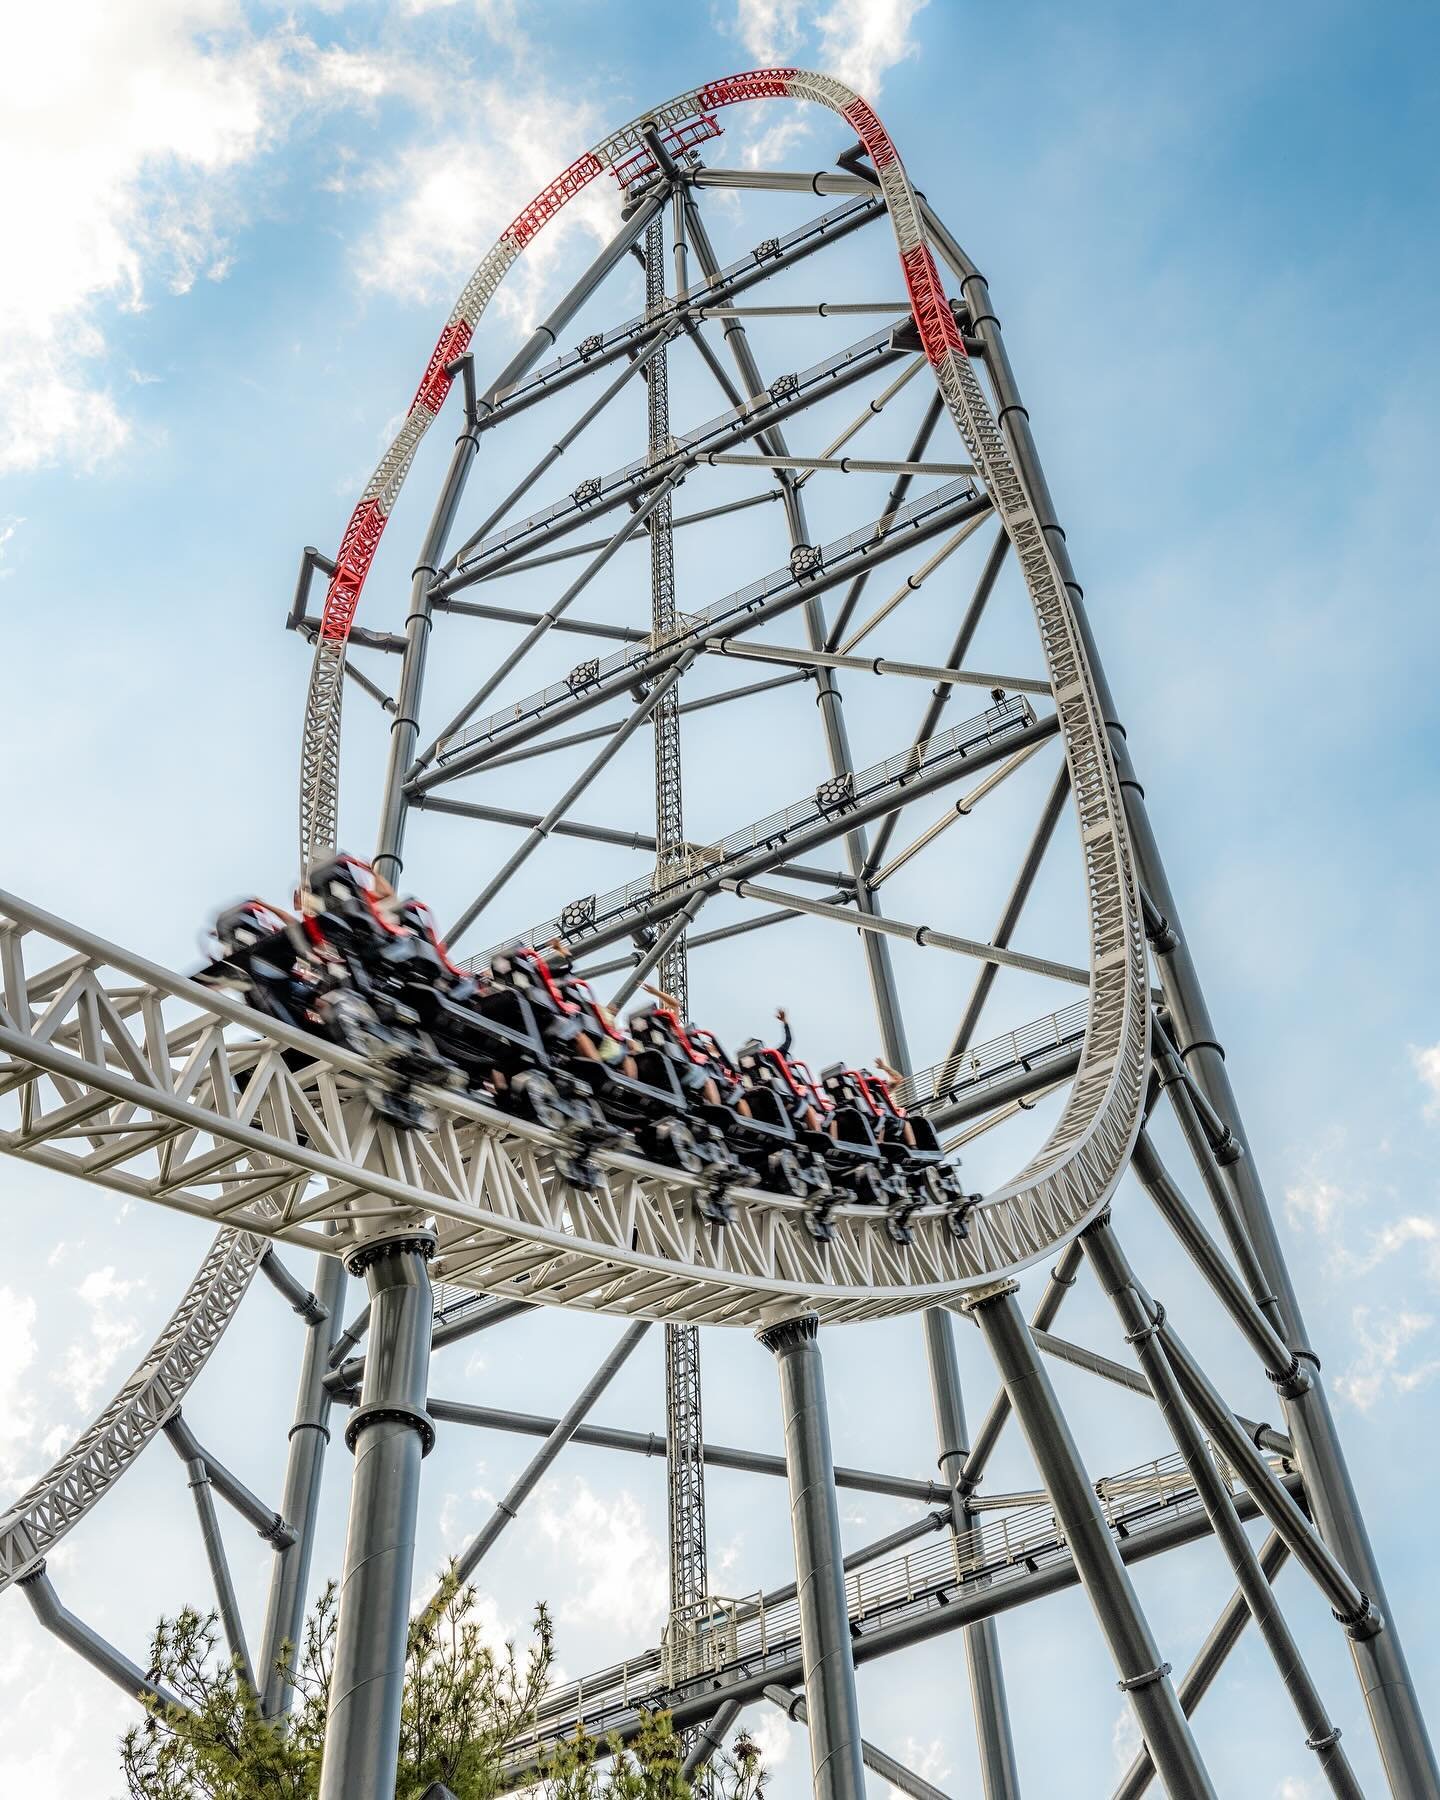 Counting the days till we get to race for the sky again ⏰ Heard there was some testing done yesterday and hope we continue to see the CP and Zamperla teams working together to get the ride back up and running reliably! 
.
🎢 Top Thrill 2 - Cedar Poin